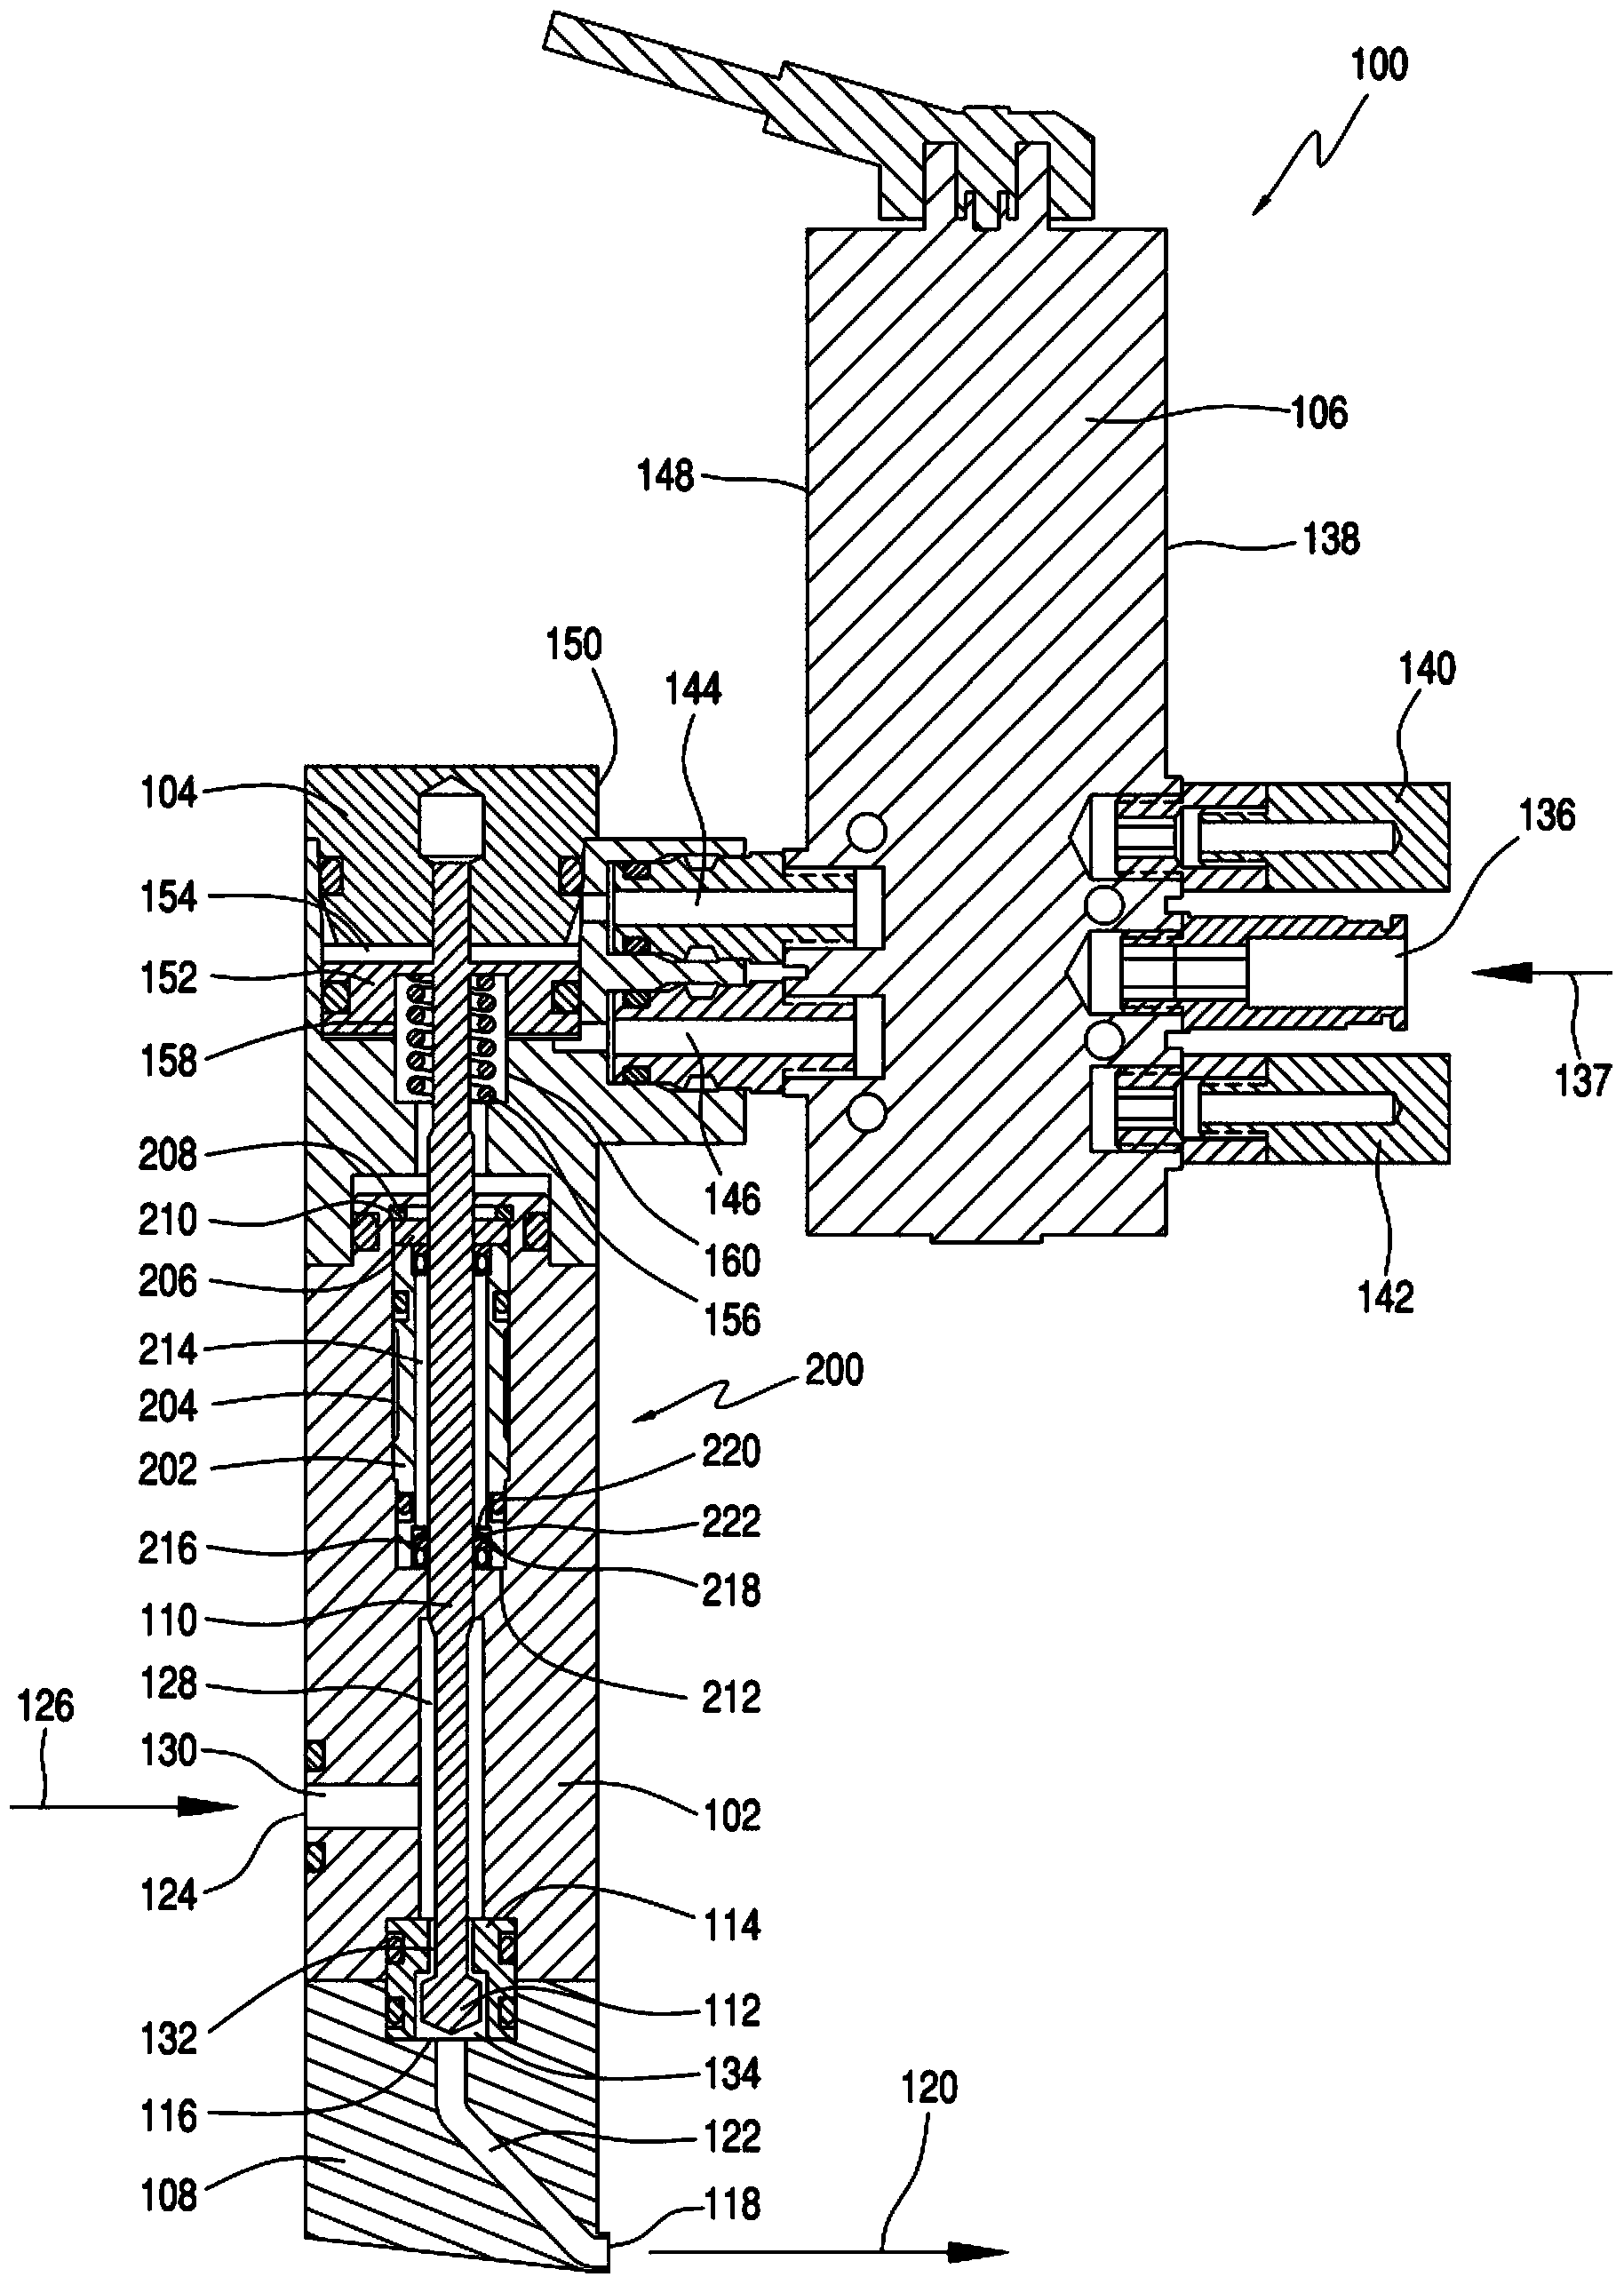 Hydraulic seal assembly for a thermoplastic material dispensing valve assembly